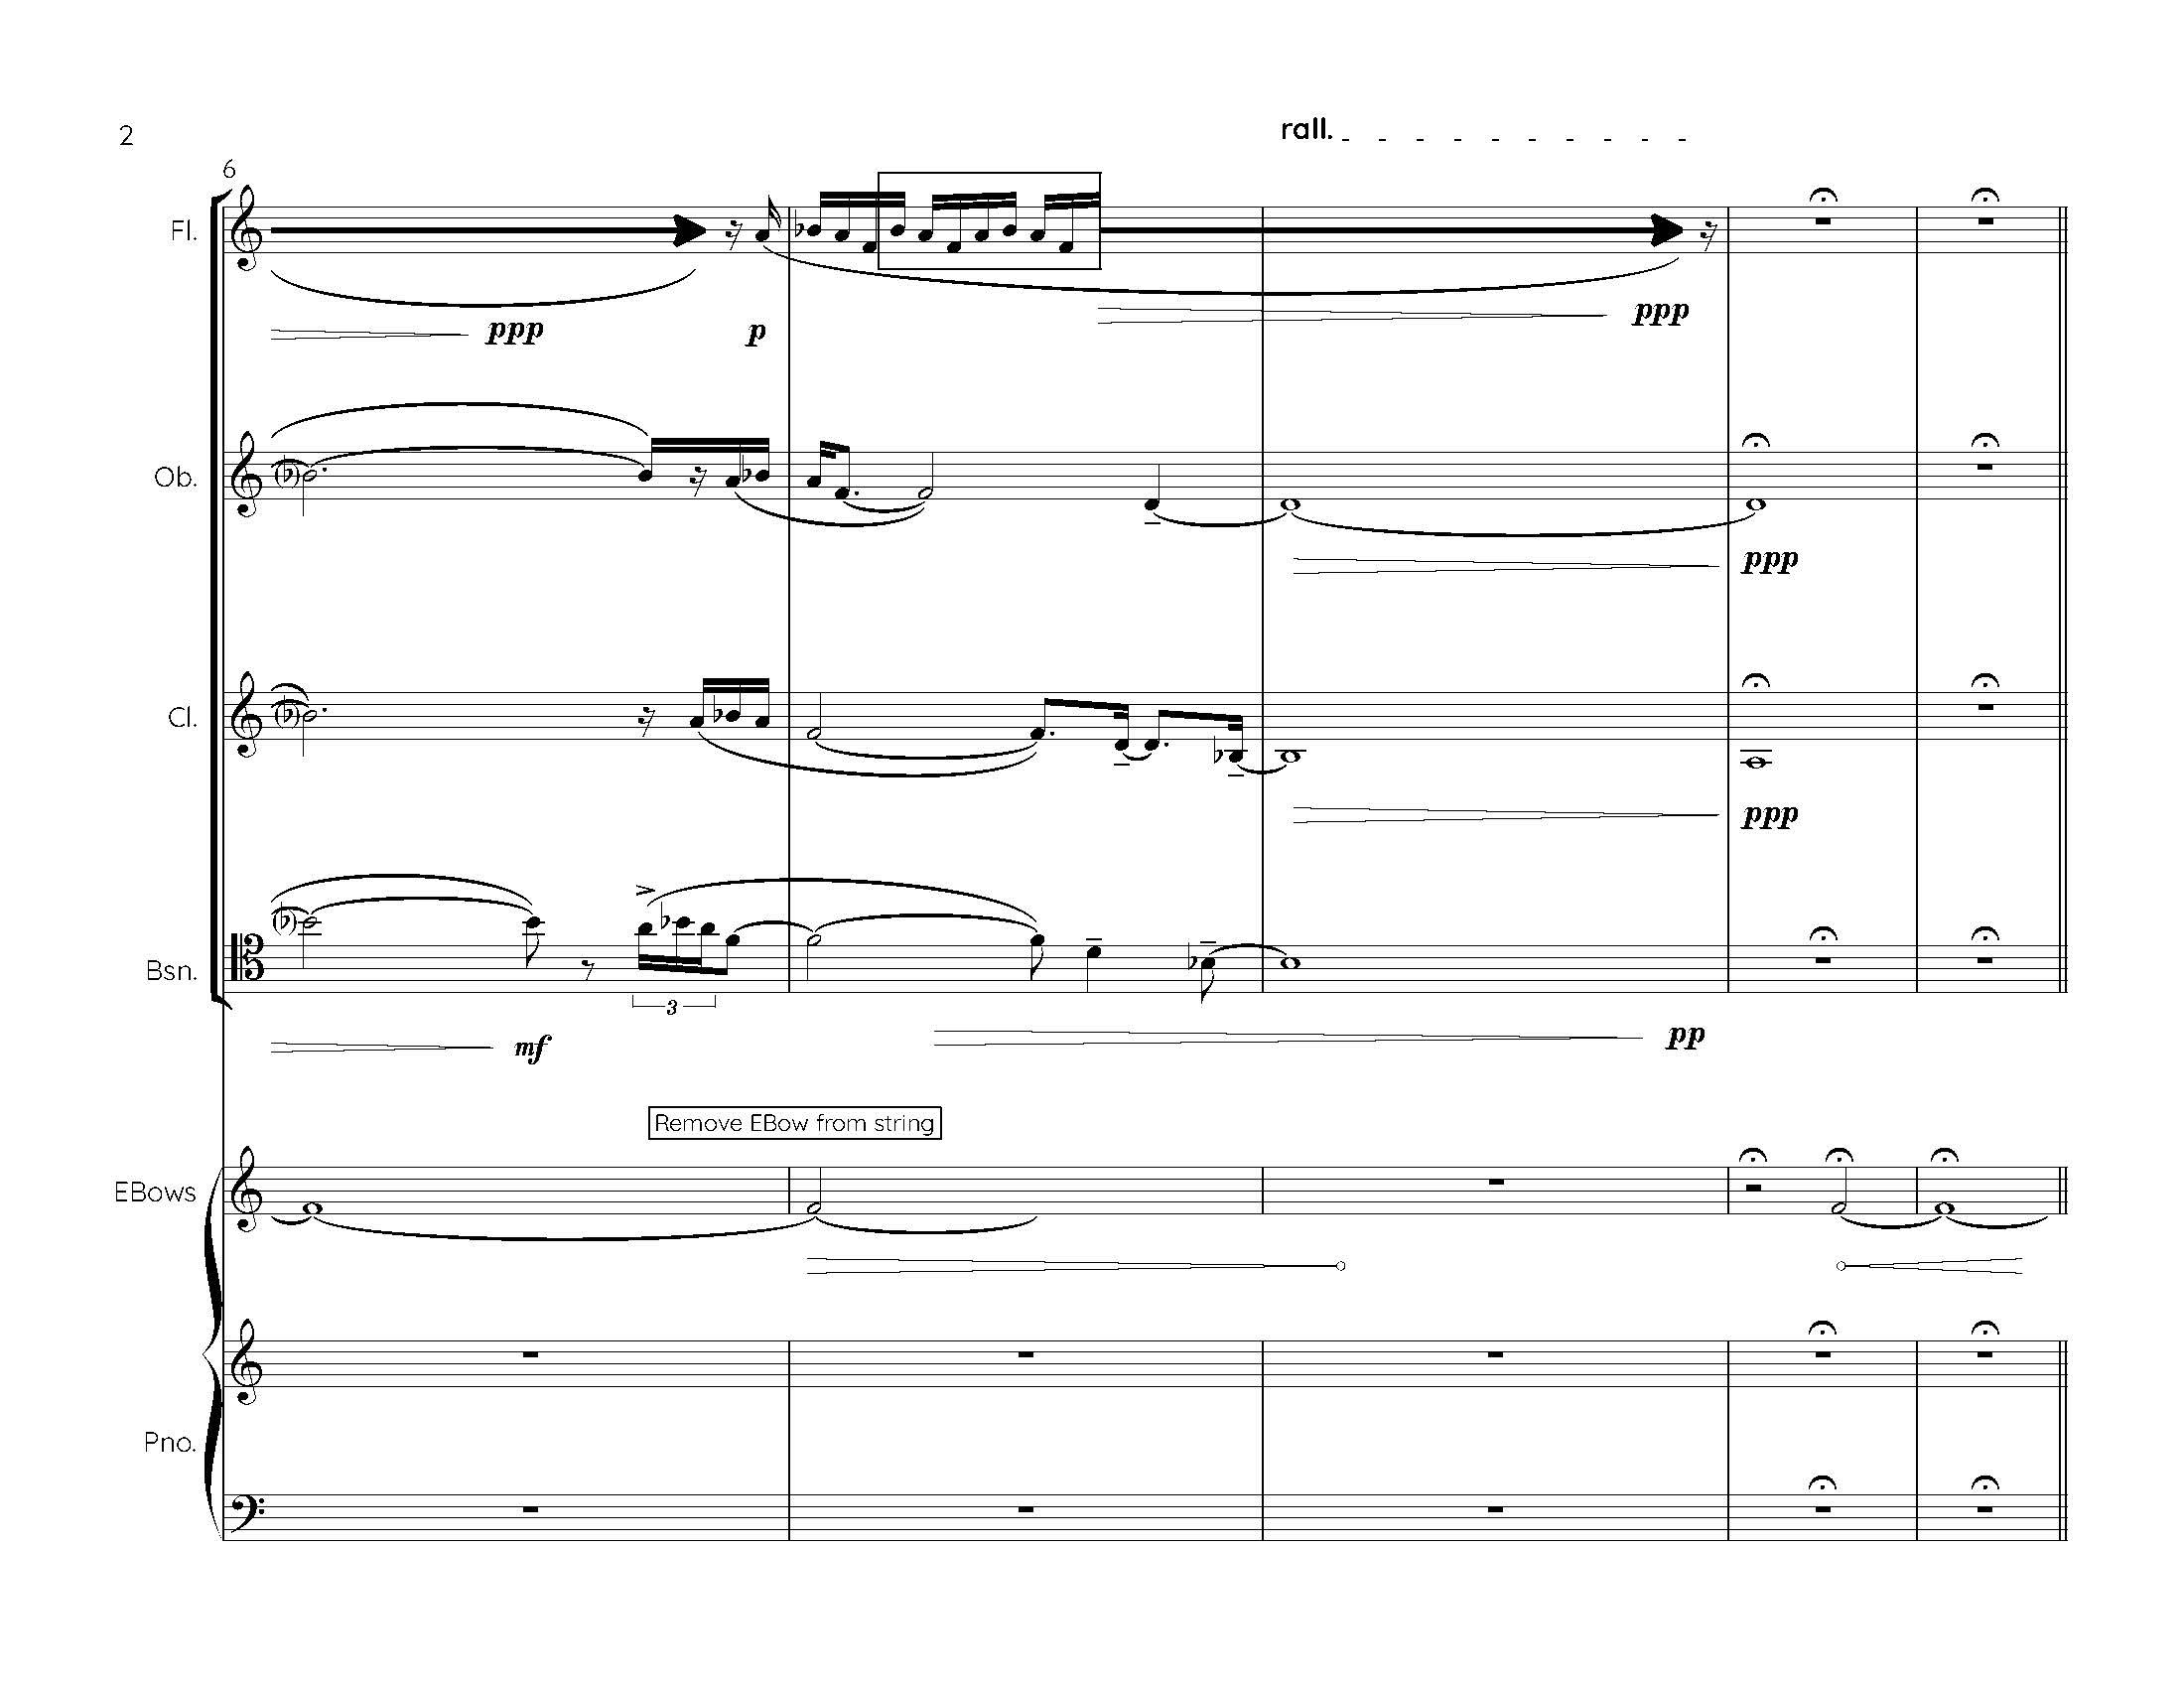 What We Wish to Remember of Ourselves - Complete Score_Page_08.jpg